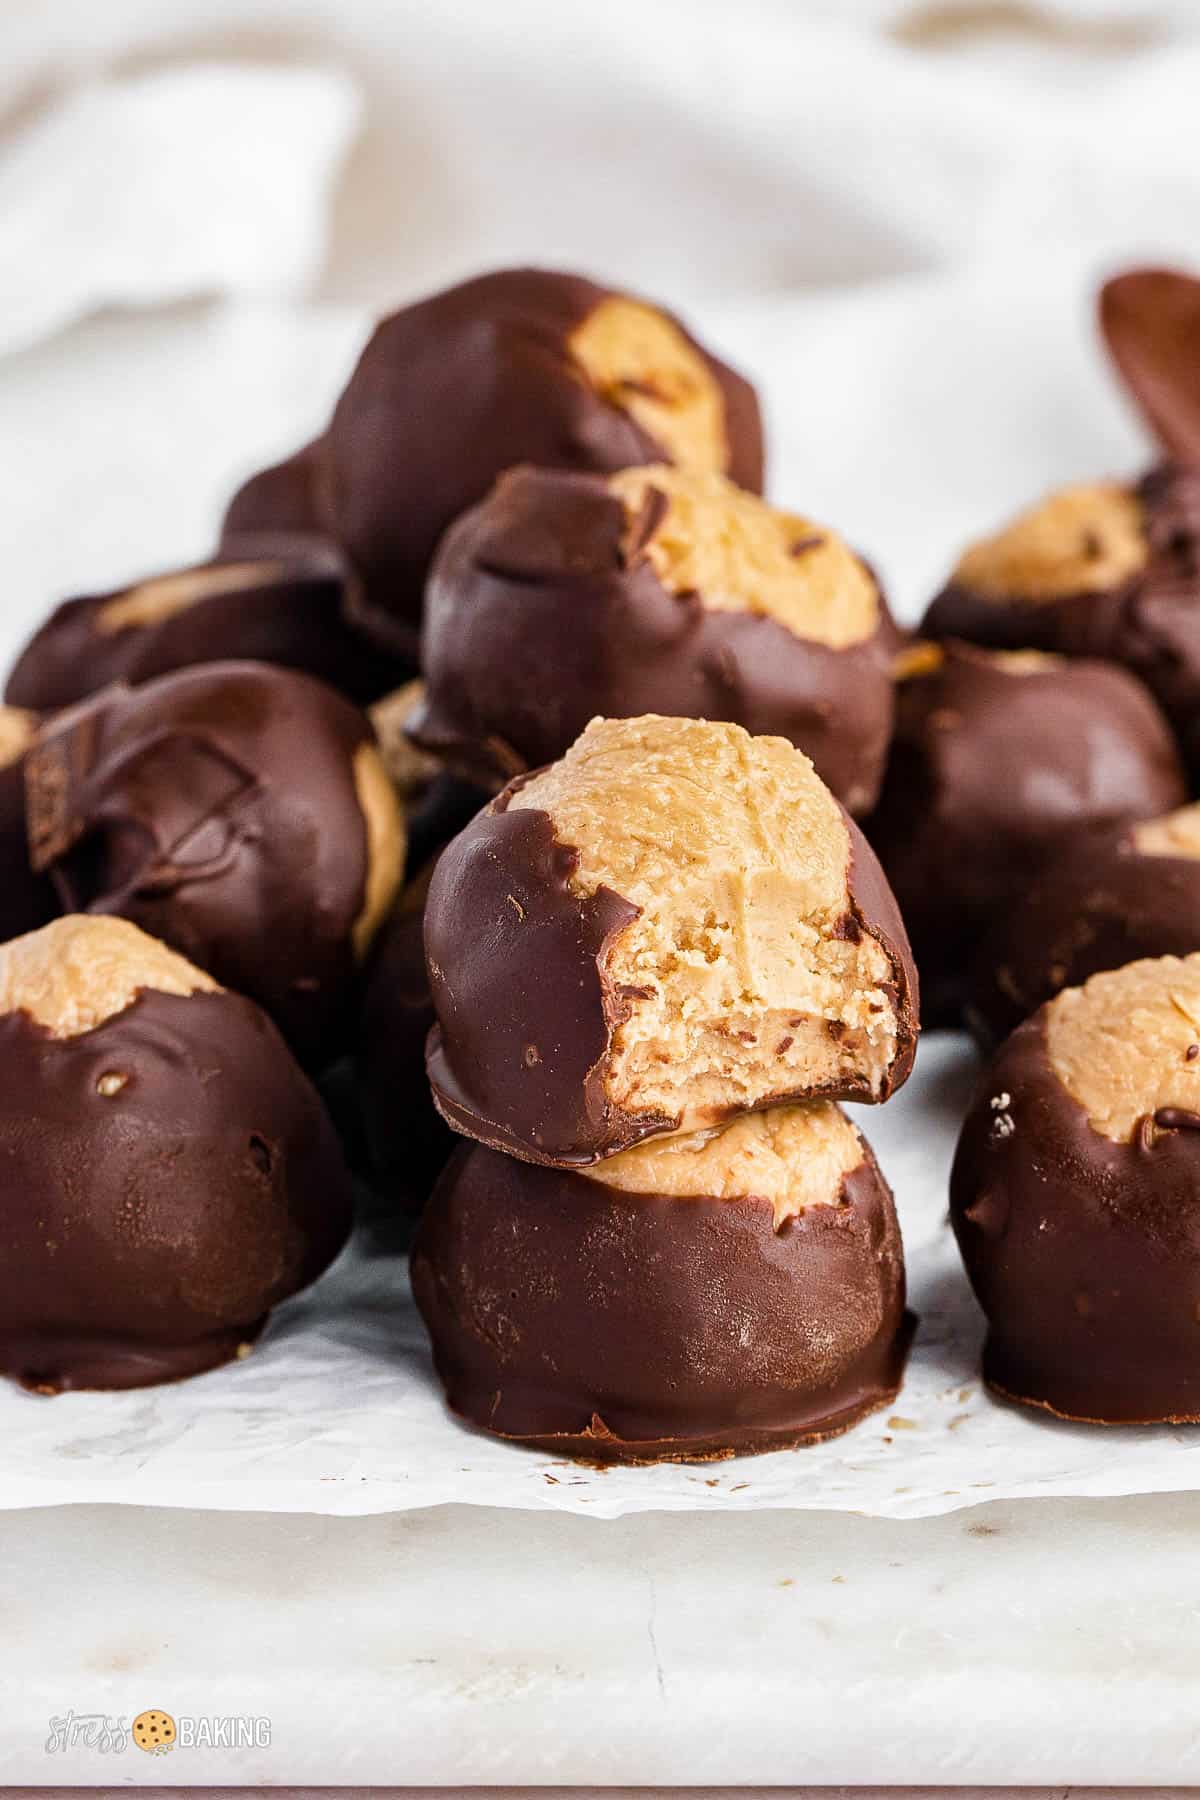 Stacks of buckeye balls on parchment paper